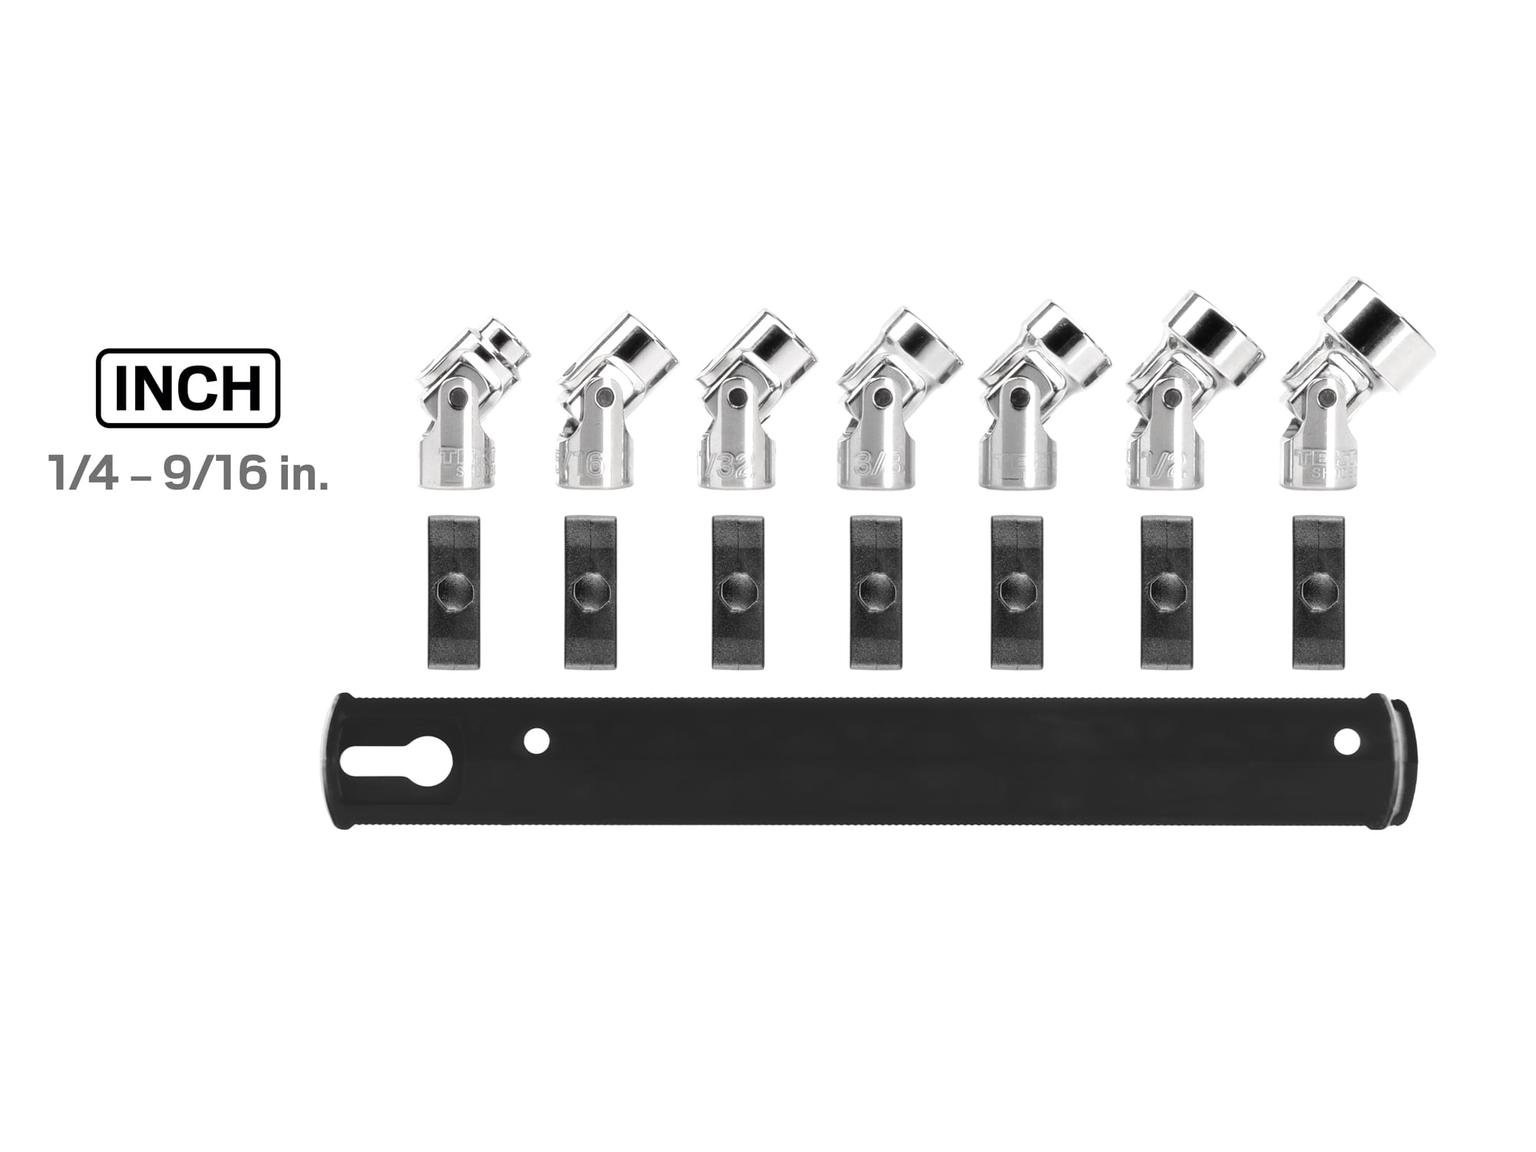 TEKTON SHD90109-T 1/4 Inch Drive Universal Joint Socket Set with Rail, 7-Piece (1/4-9/16 in.)